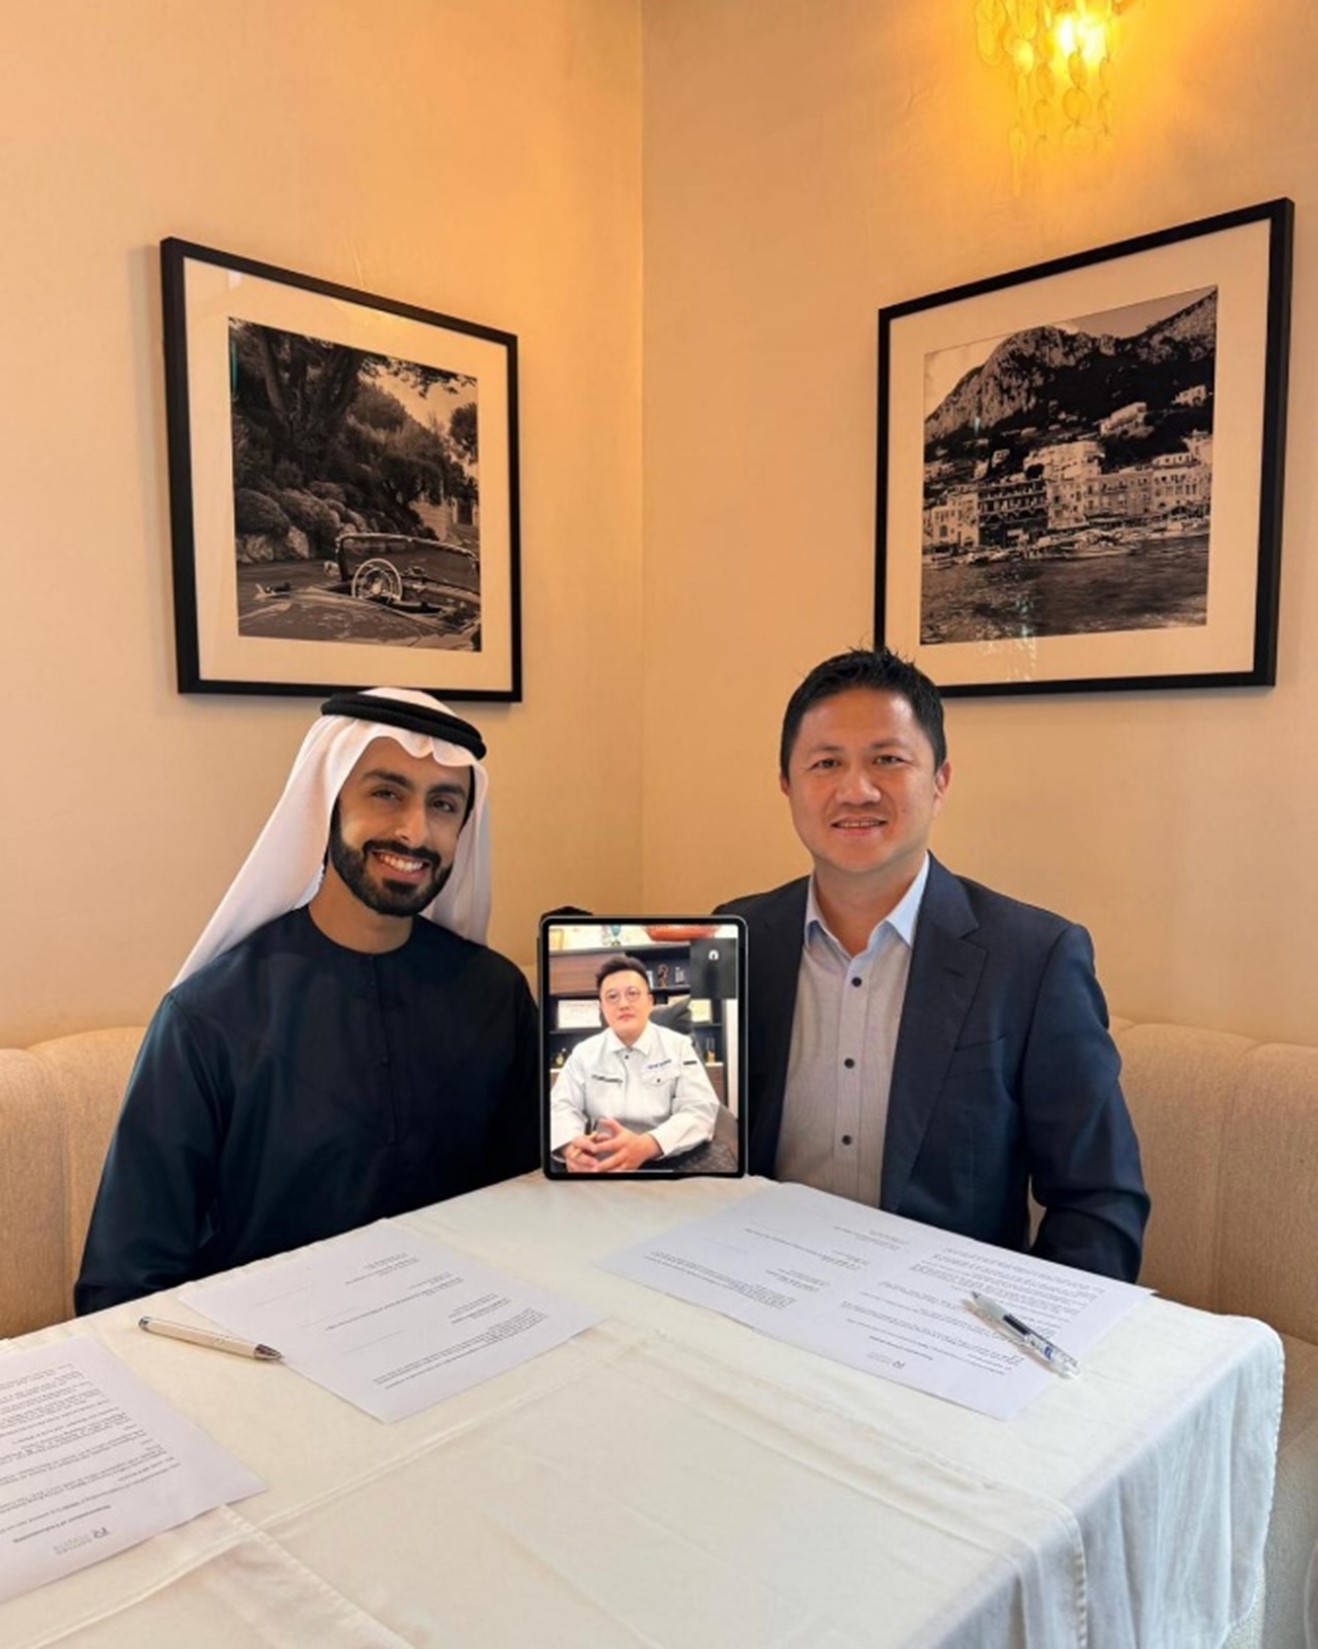 The Memorandum was signed by (from right): Chi-man Kwan, Group CEO and Co-founder of Raffles Family Office, Liu Yang, Chairman and CEO of National Cooperation New Energy, and His Highness Sheikh Ali Rashed Ali Saeed Al Maktoum.